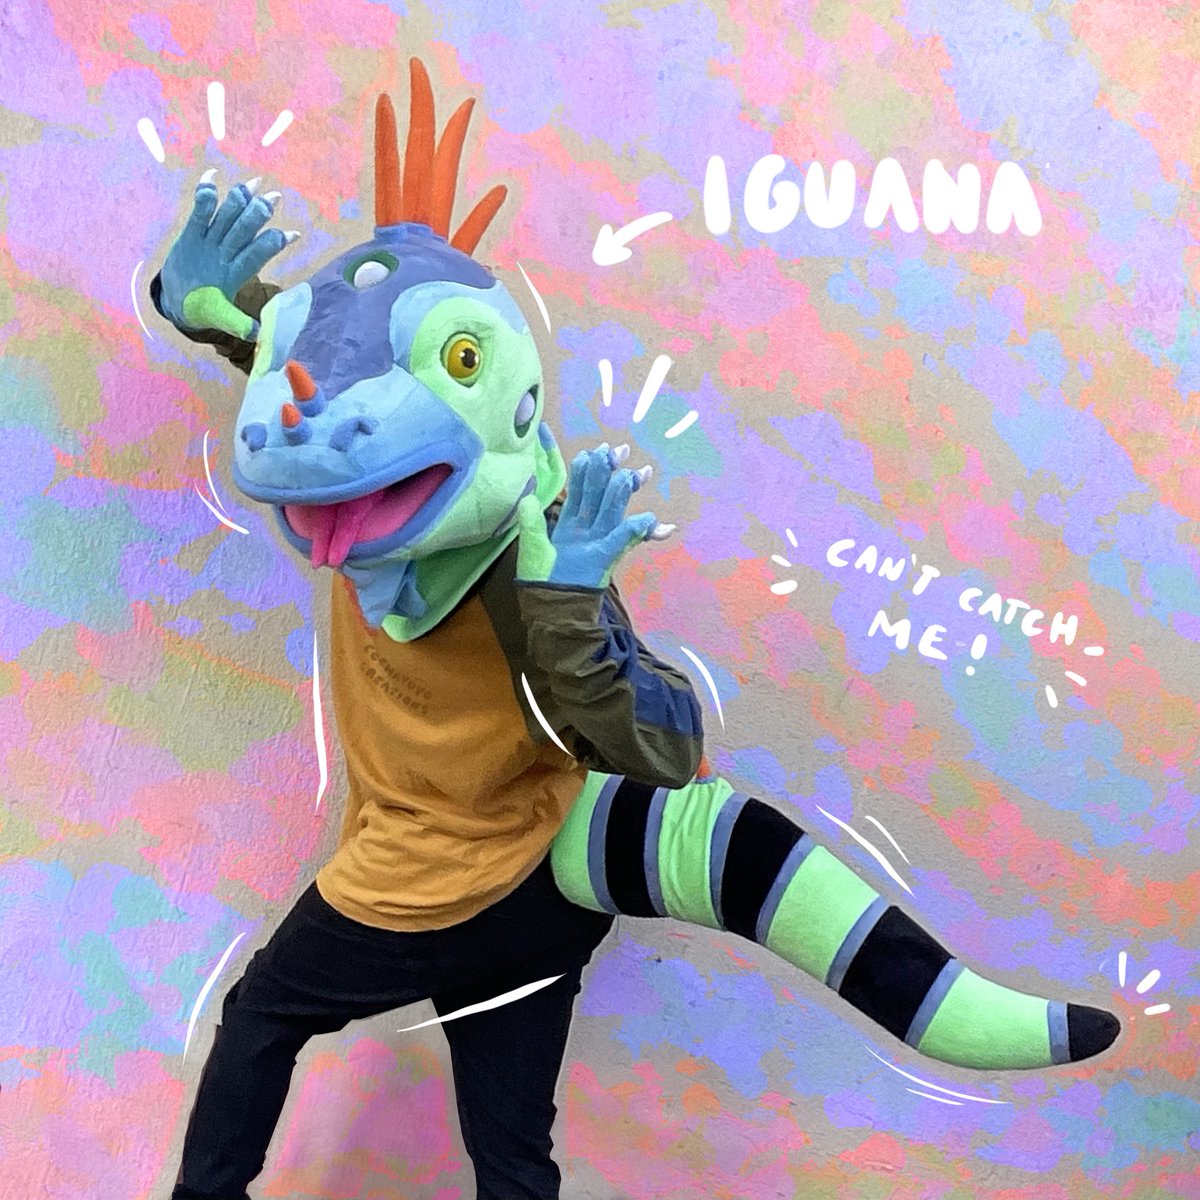 IGUANA TIME! Commission work for the amazing @llm_costumes_ I think this is the most colorful baby ive done so far, and it was such a fun experience! #fursuitfriday #fursuitmaker #furry #iguana #scalie